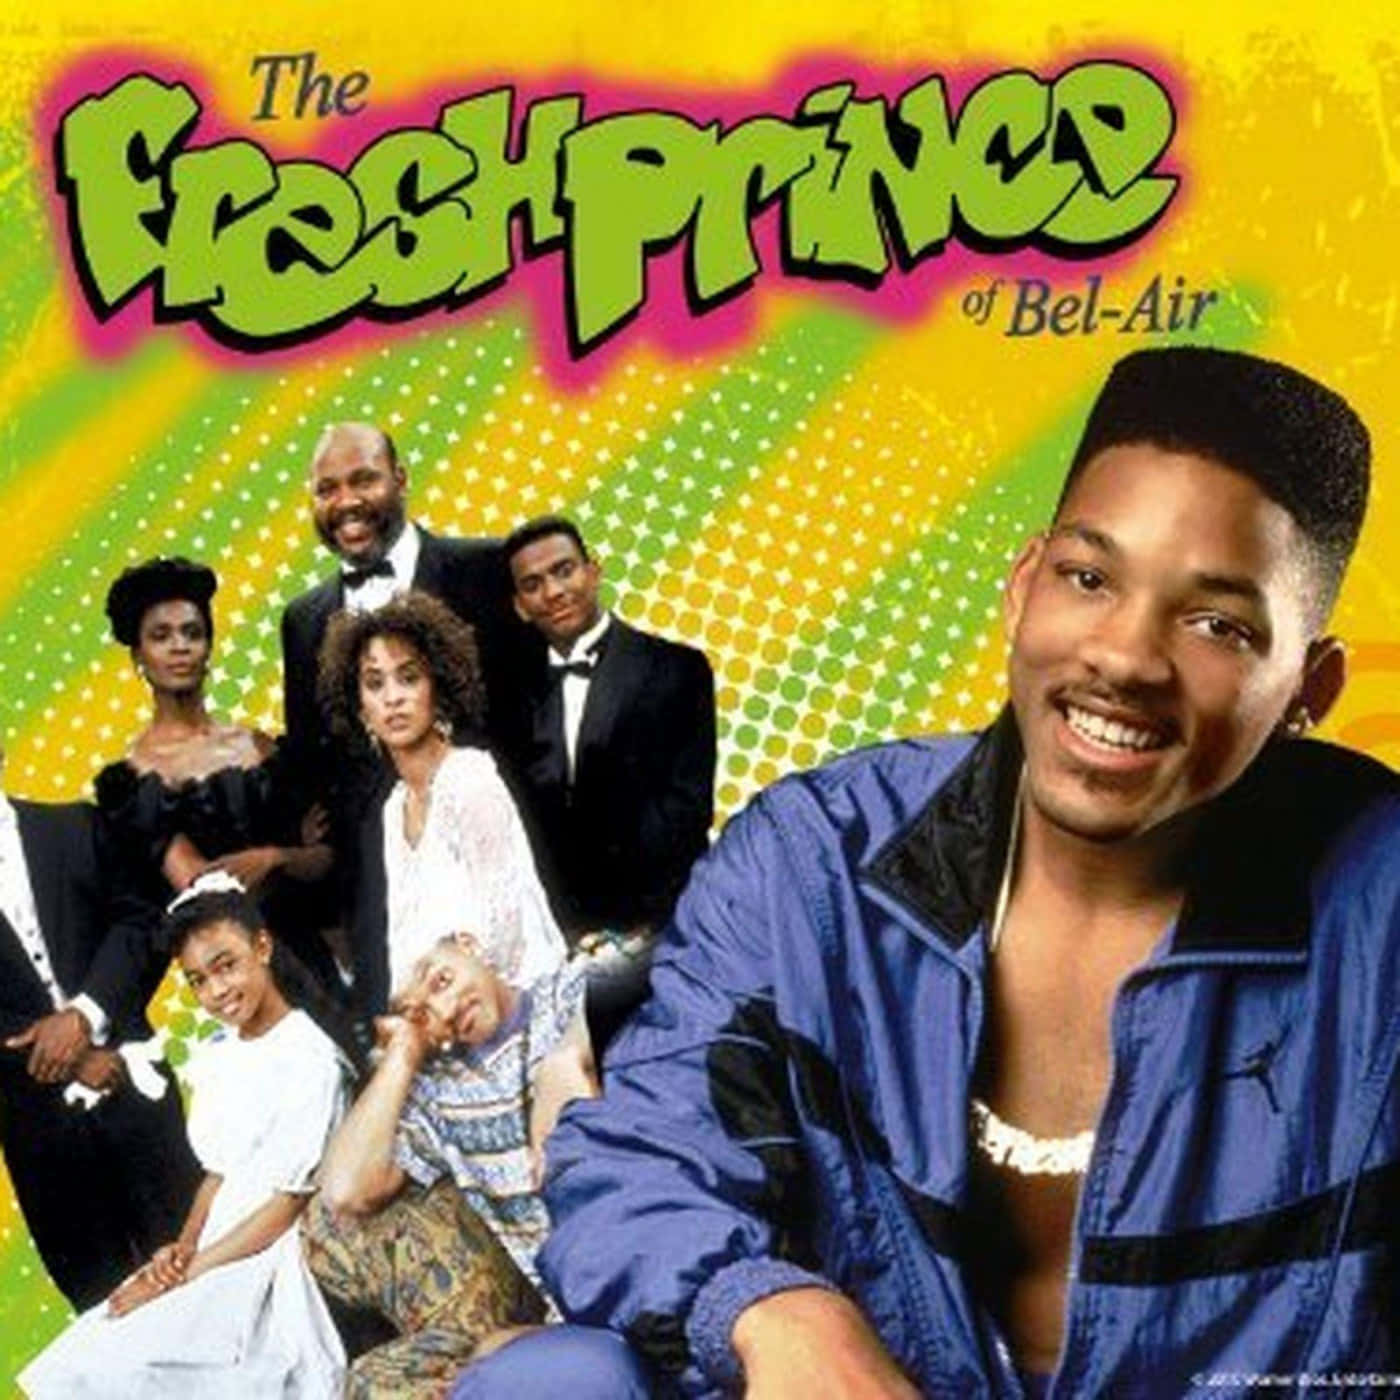 The Fresh Prince of Bel-Air – Will Smith on a Graffiti Backdrop